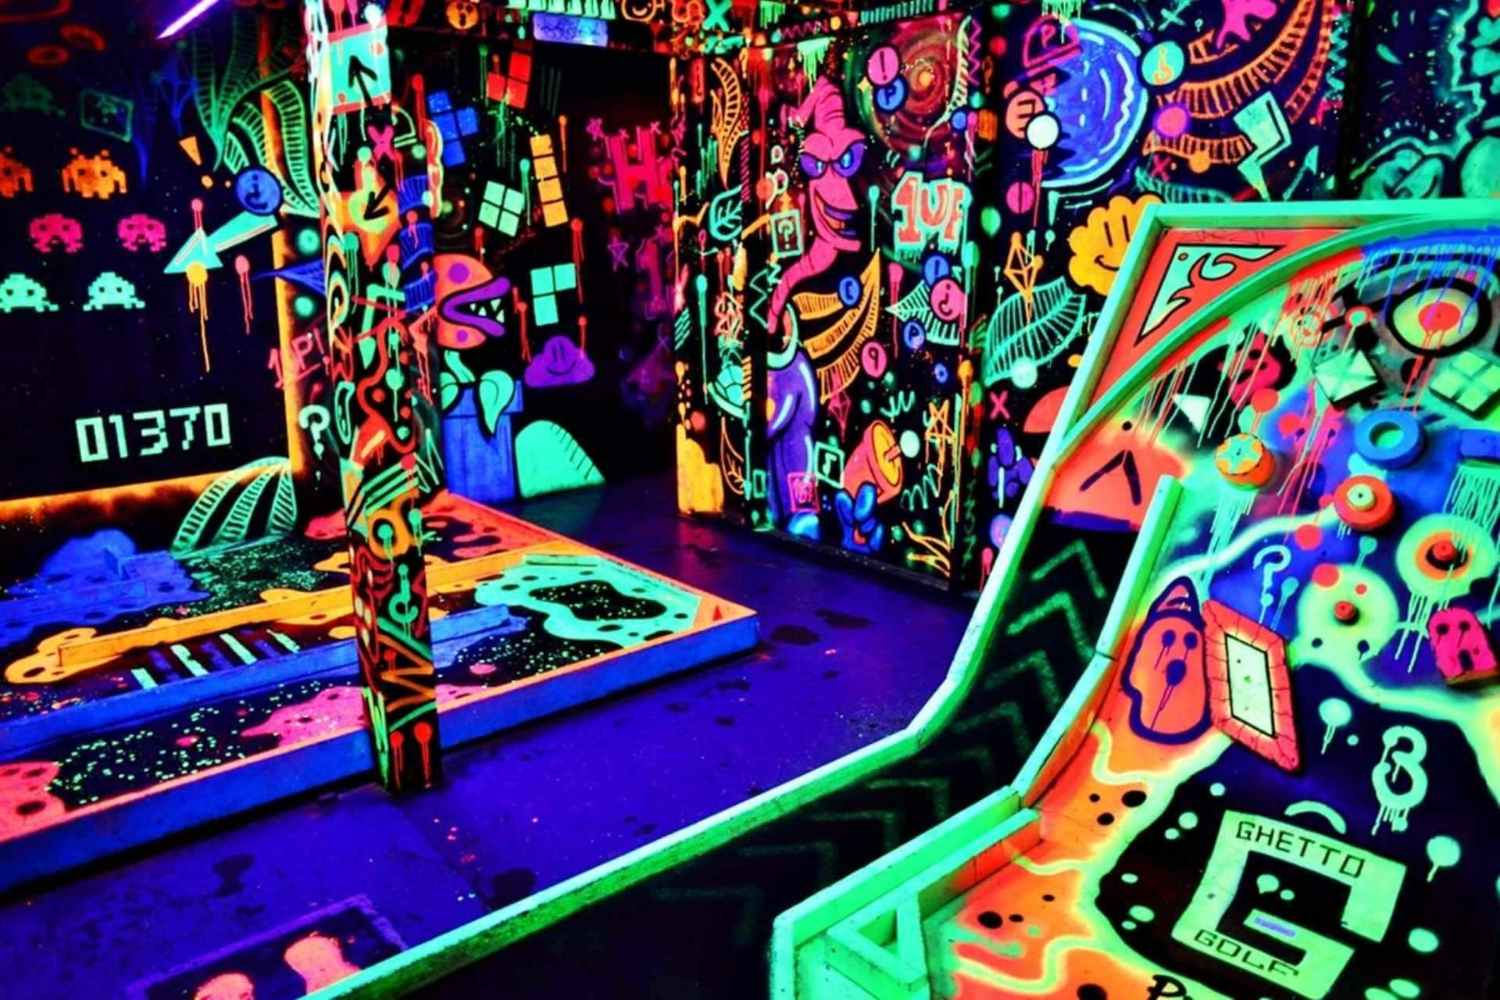 ©ghetto-golf-indoor-crazy-golf-lit-up-by-bright-neon-colours-things-to-do-in-birmingham-at-night